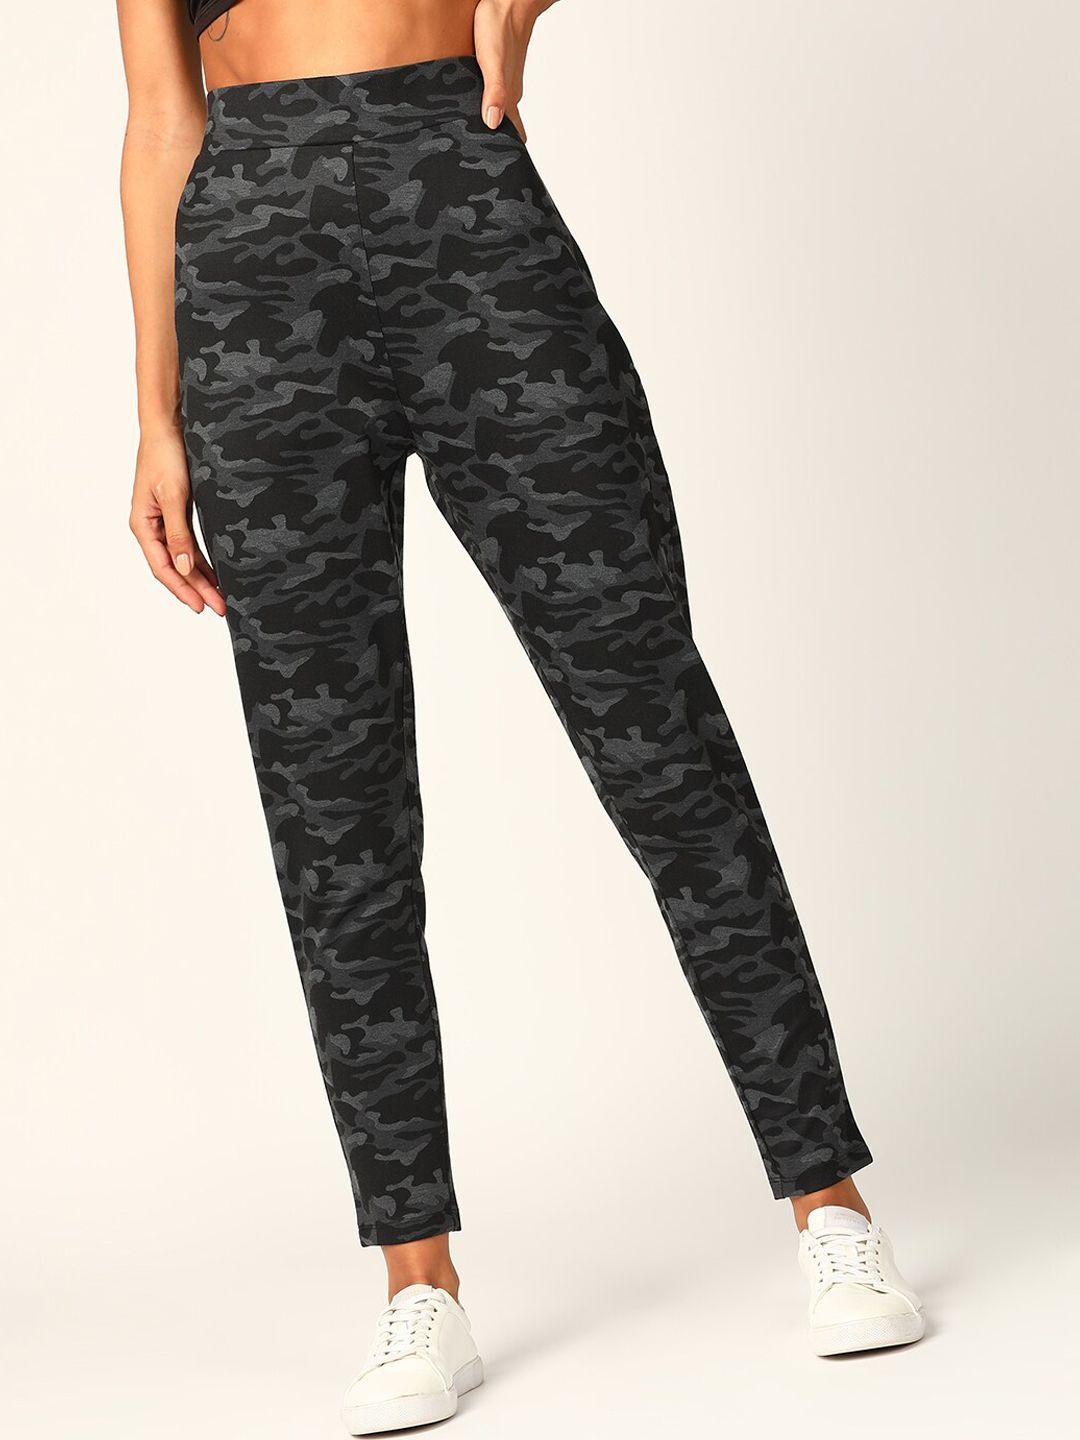 dressberry-women-camouflage-printed-mid-rise-regular-fit-track-pants